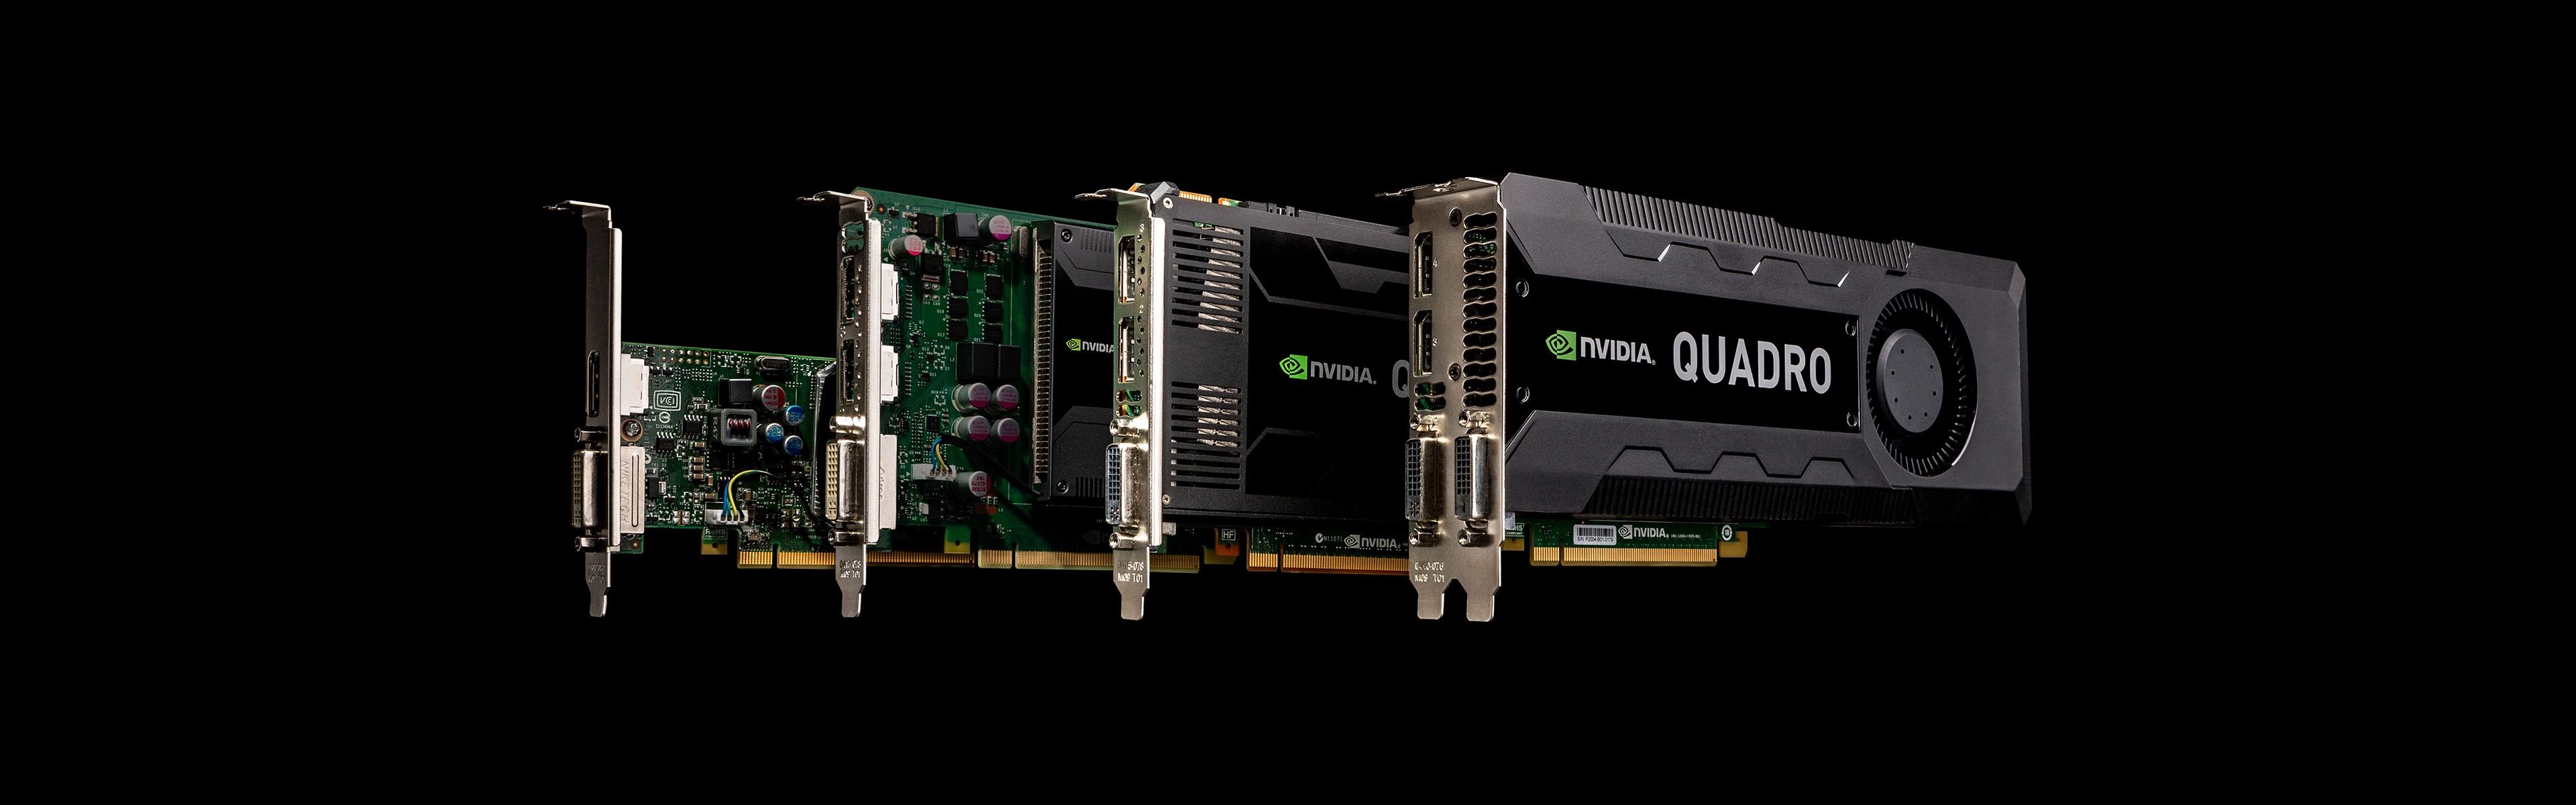 General 3840x1200 Nvidia GPUs computer simple background multiple display technology PC gaming hardware black background